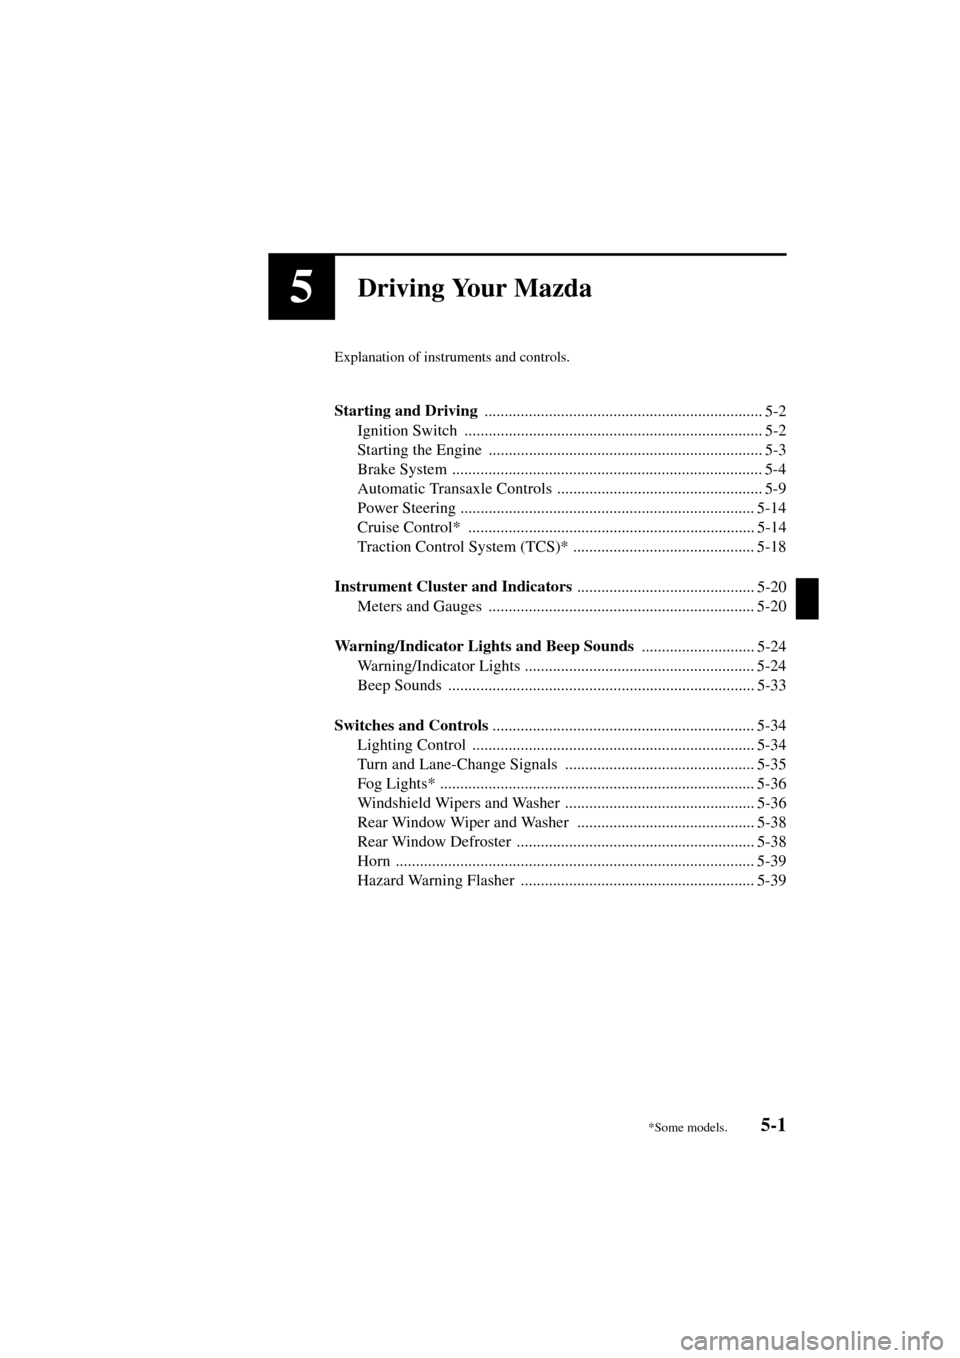 MAZDA MODEL MPV 2004  Owners Manual (in English) 5-1
Form No. 8S06-EA-03H
5Driving Your Mazda
Explanation of instruments and controls.
Starting and Driving 
..................................................................... 5-2
Ignition Switch  .